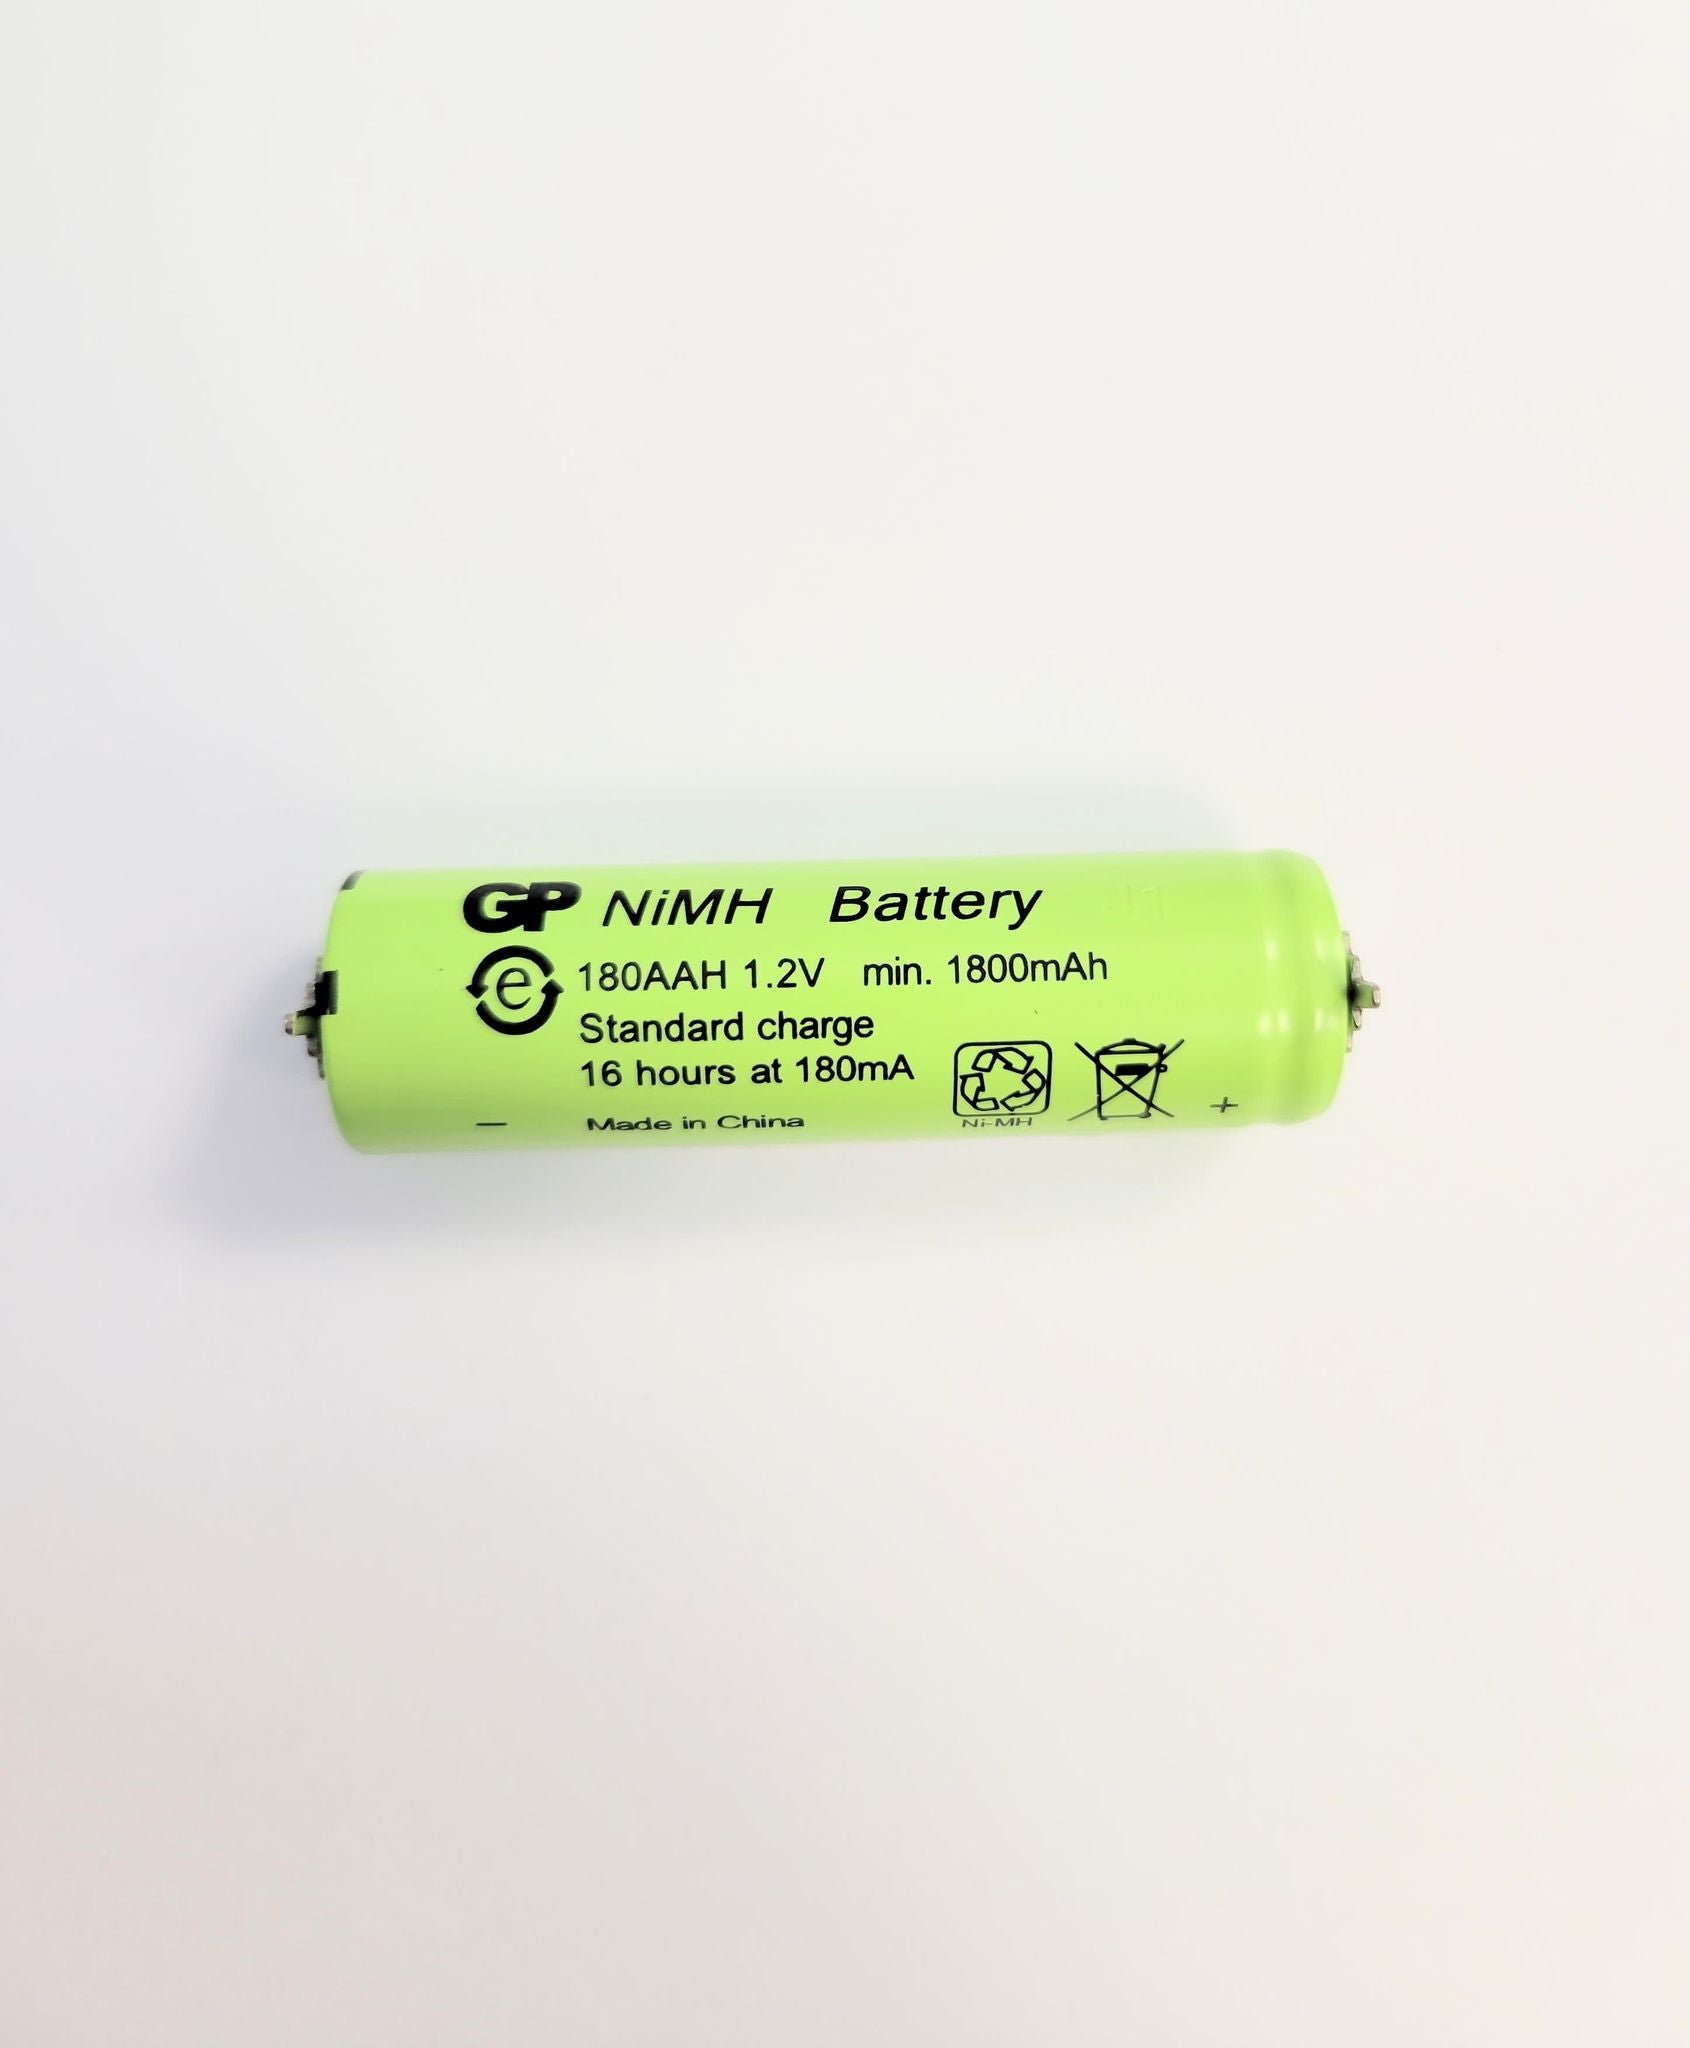 Wahl Chromini Battery 180aah 1.2v Replacement.  NiMH battery for Wahl Clippers 96679